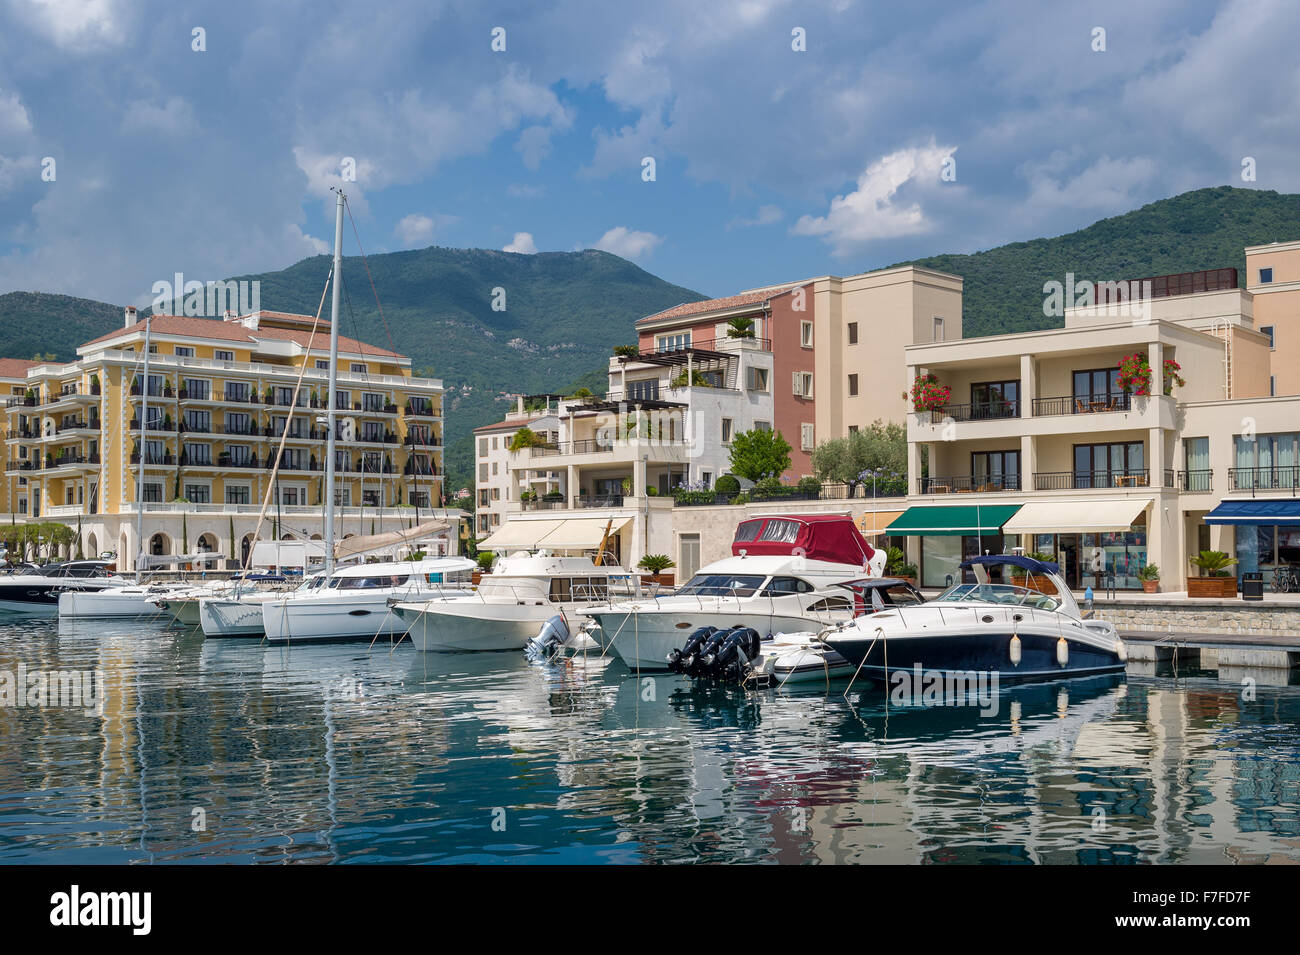 Tivat recreational boats and beautiful houses Stock Photo